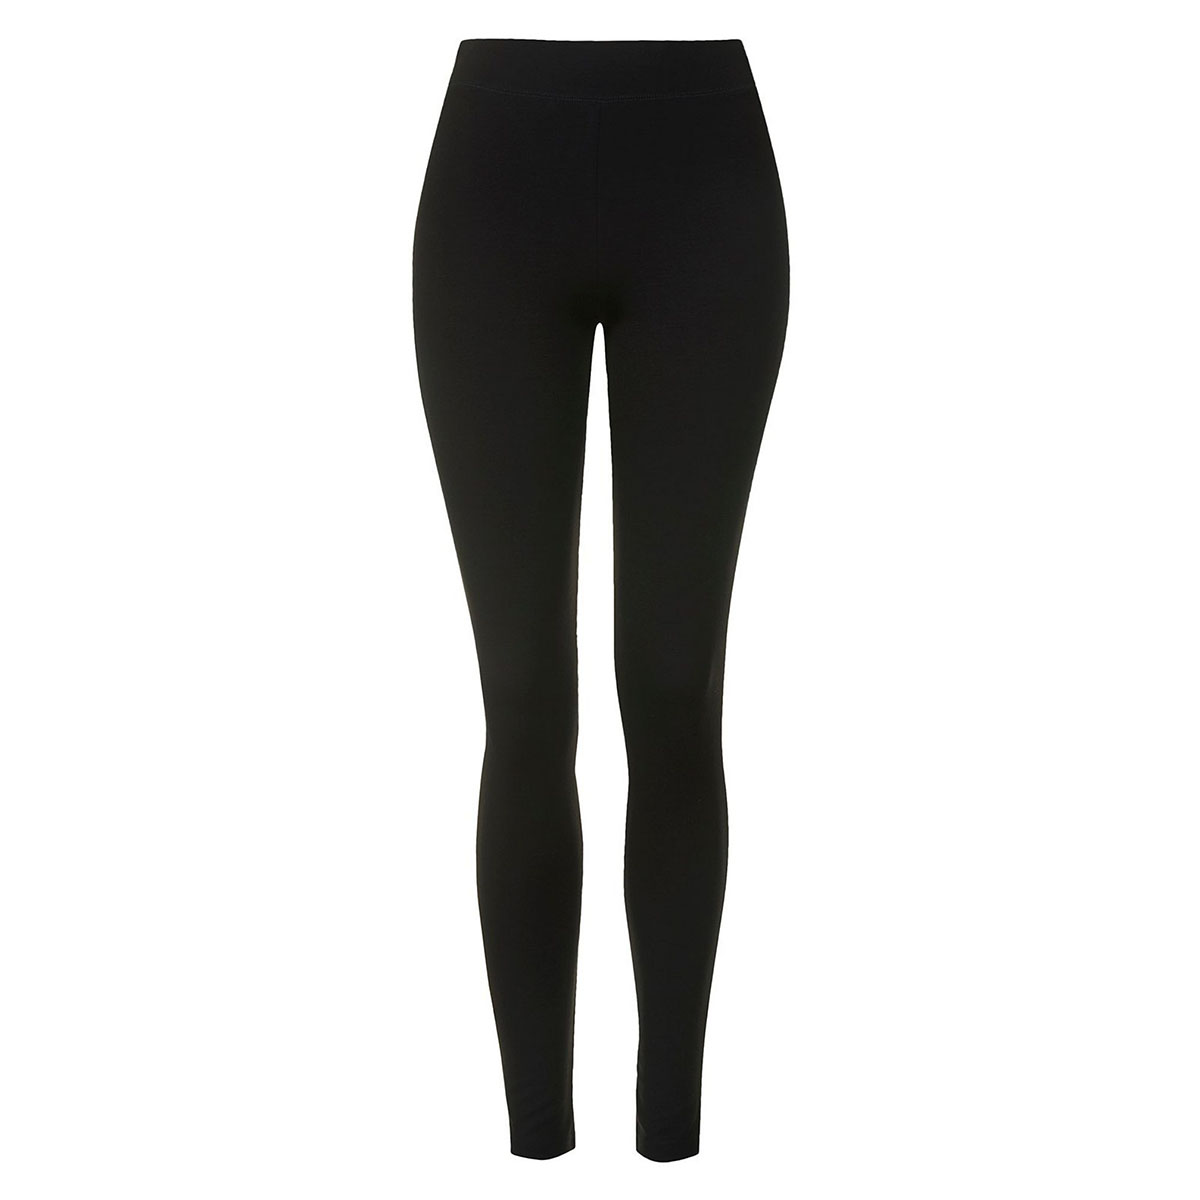 Shop the Best Black Leggings for Every Budget | Who What Wear UK